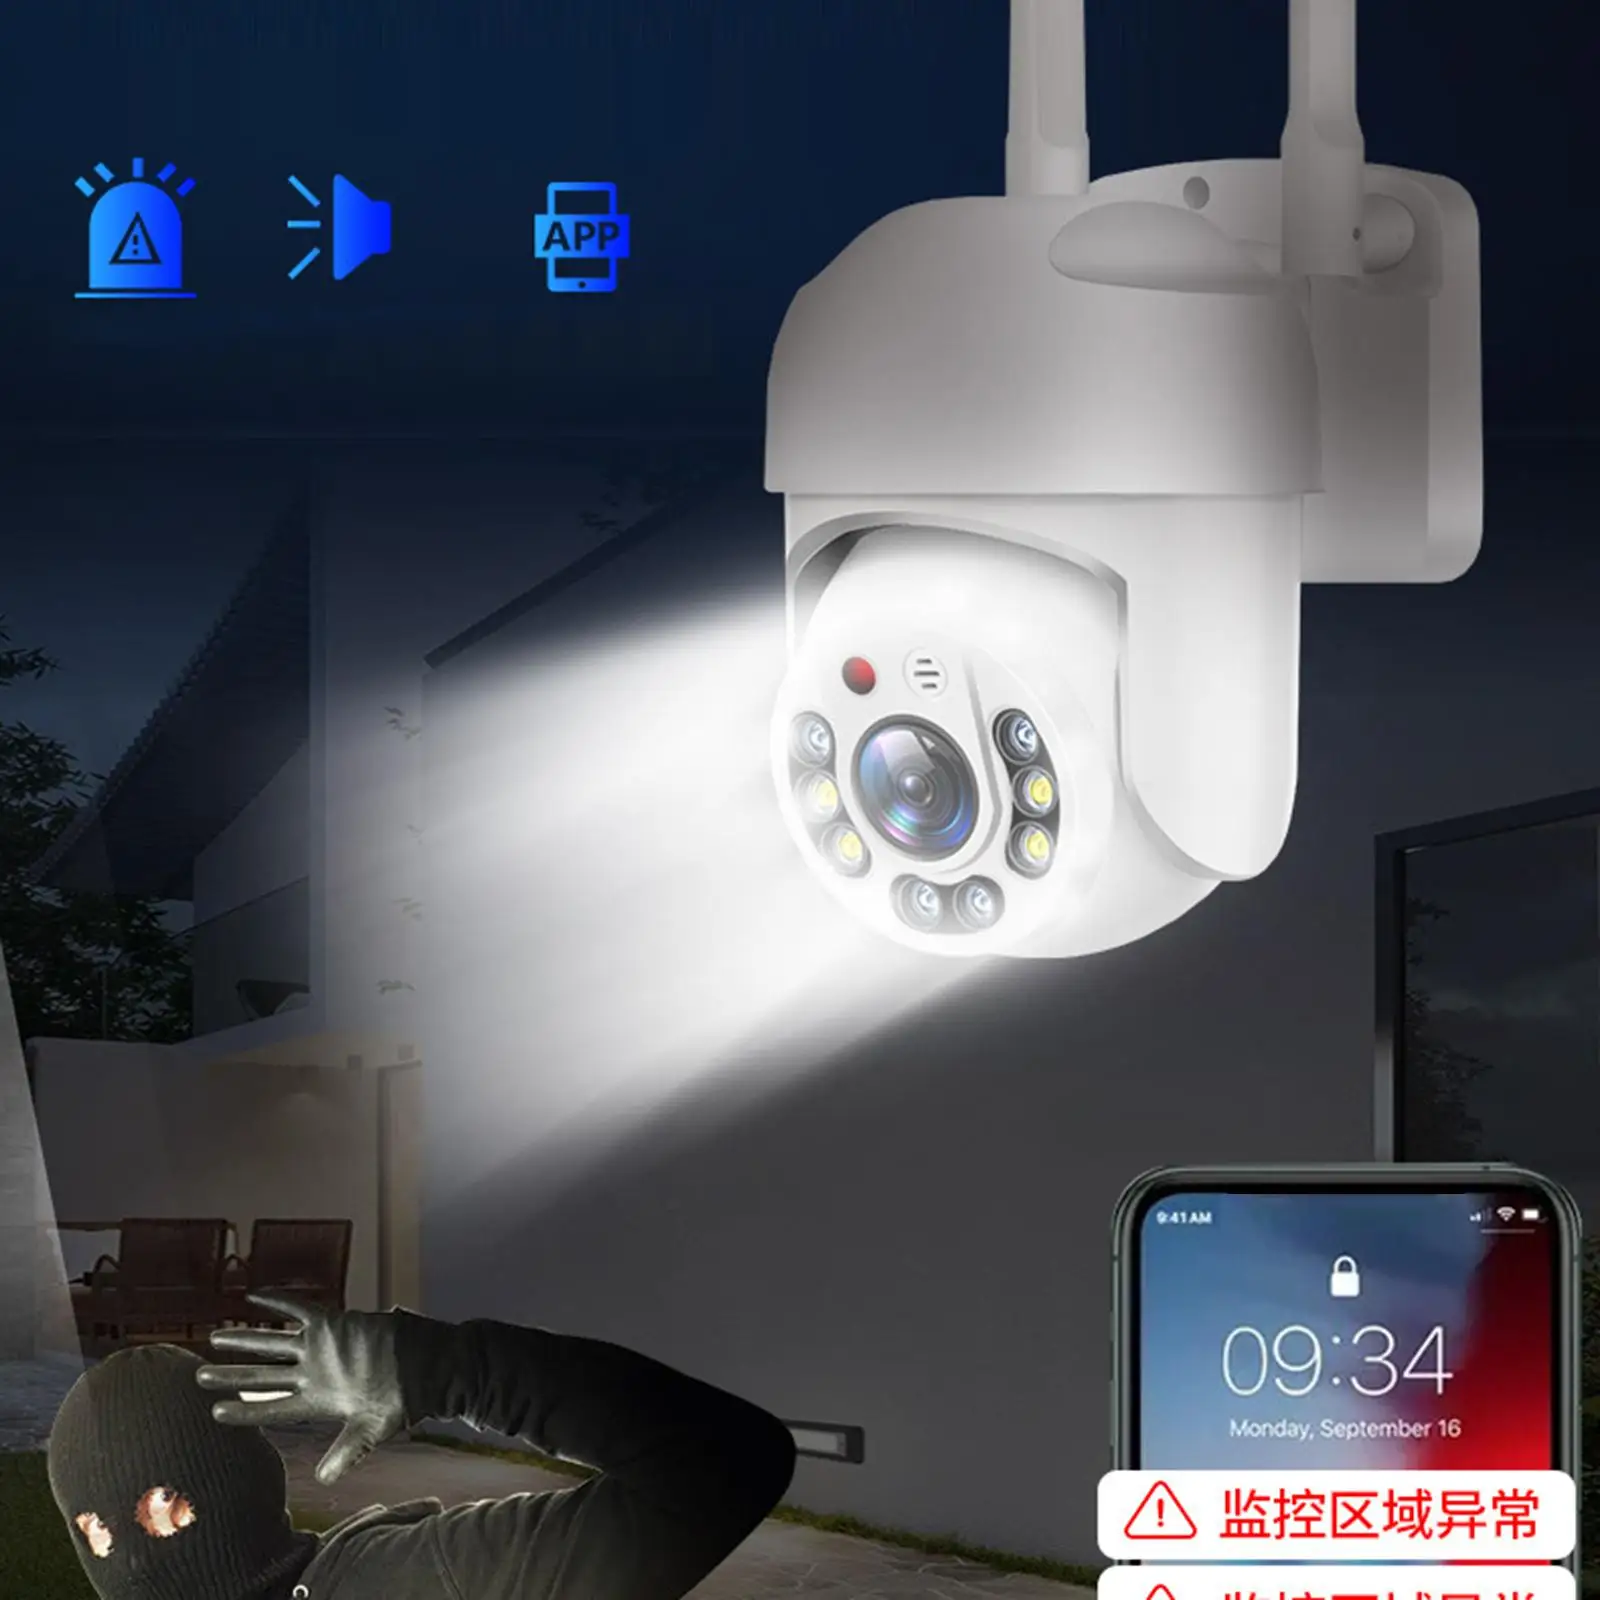 Security Camera Network Surveillance Auto Tracking Weatherproof Color Night View Remote View IP Camera for Outdoor Indoor Home